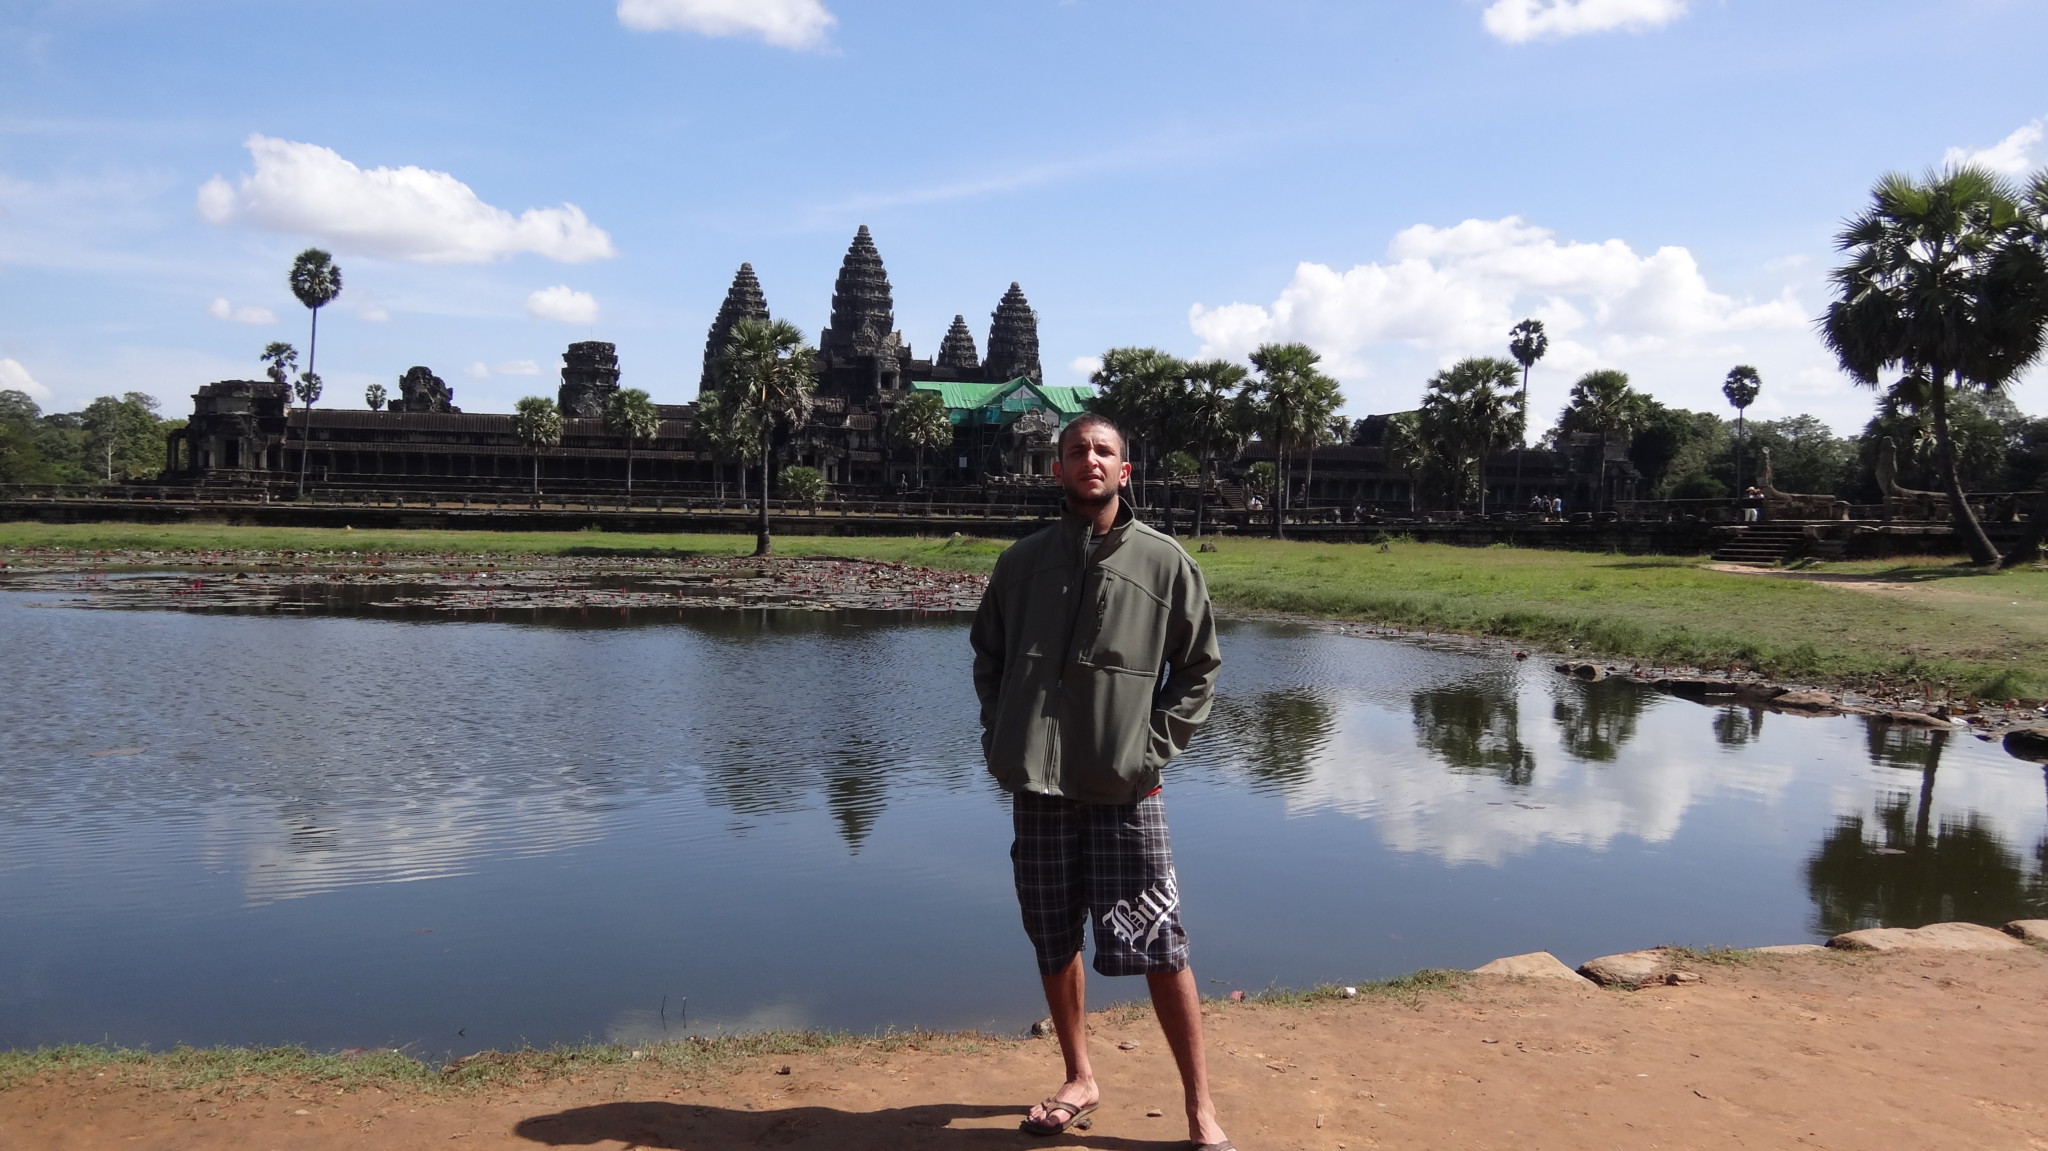 a man standing in front of a body of water with Angkor Wat in the background